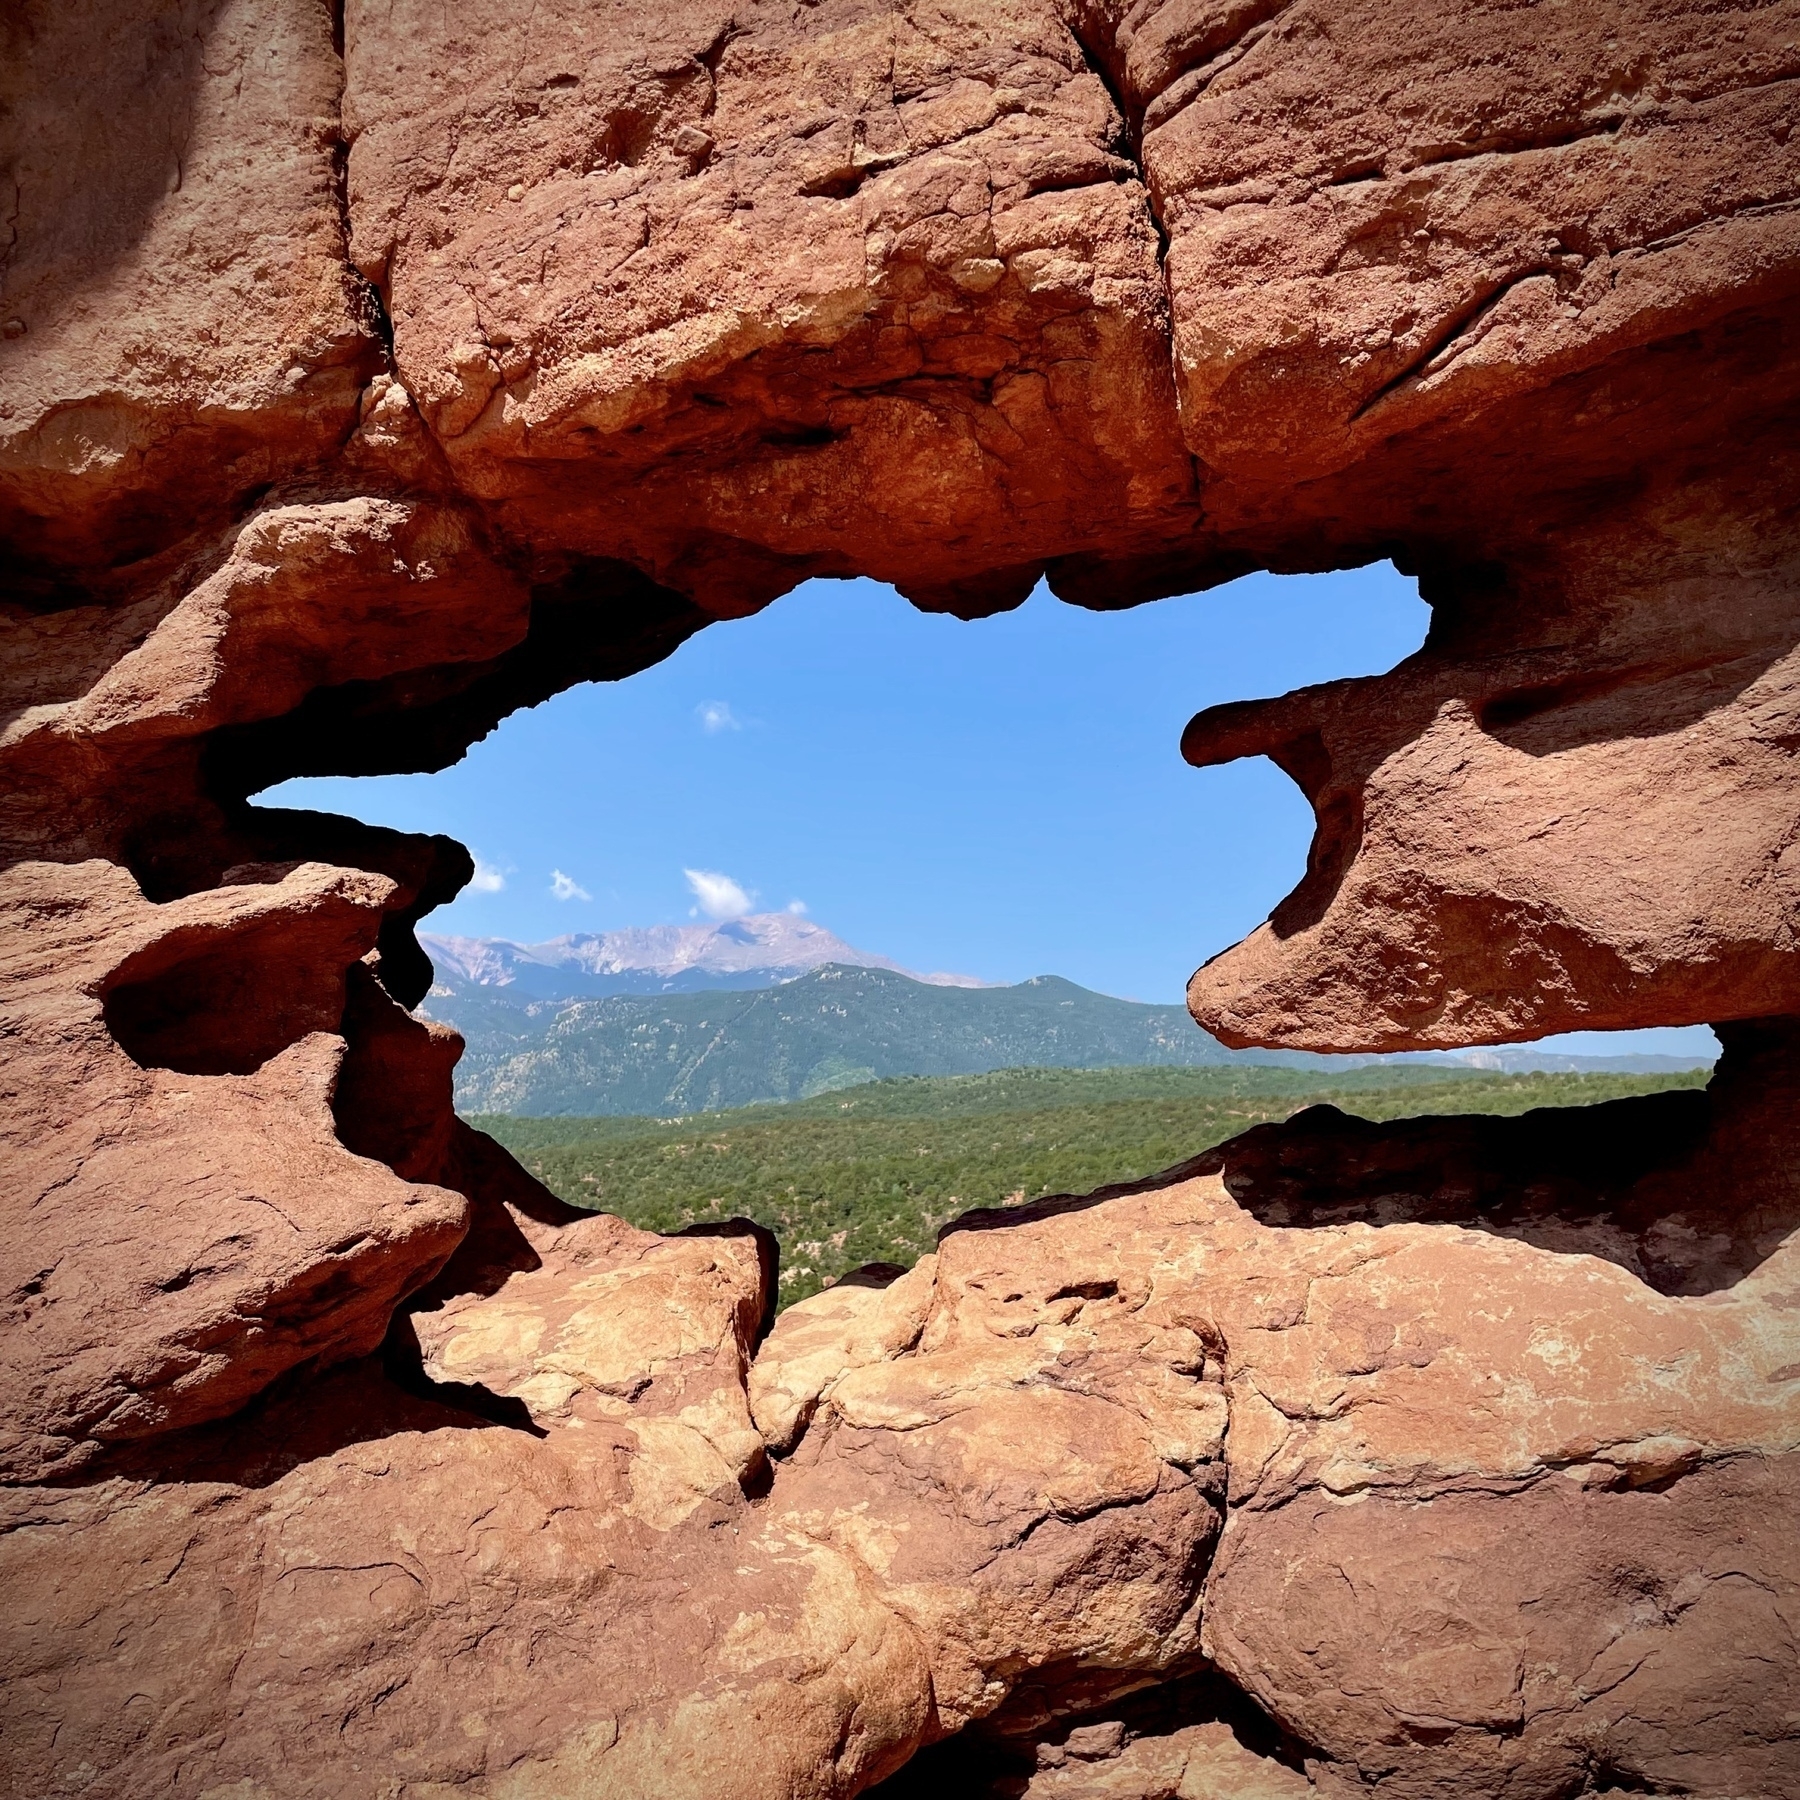 View through the Siamese Twins Rock formation in Garden of the Gods, to Pike's Peak in the distance.